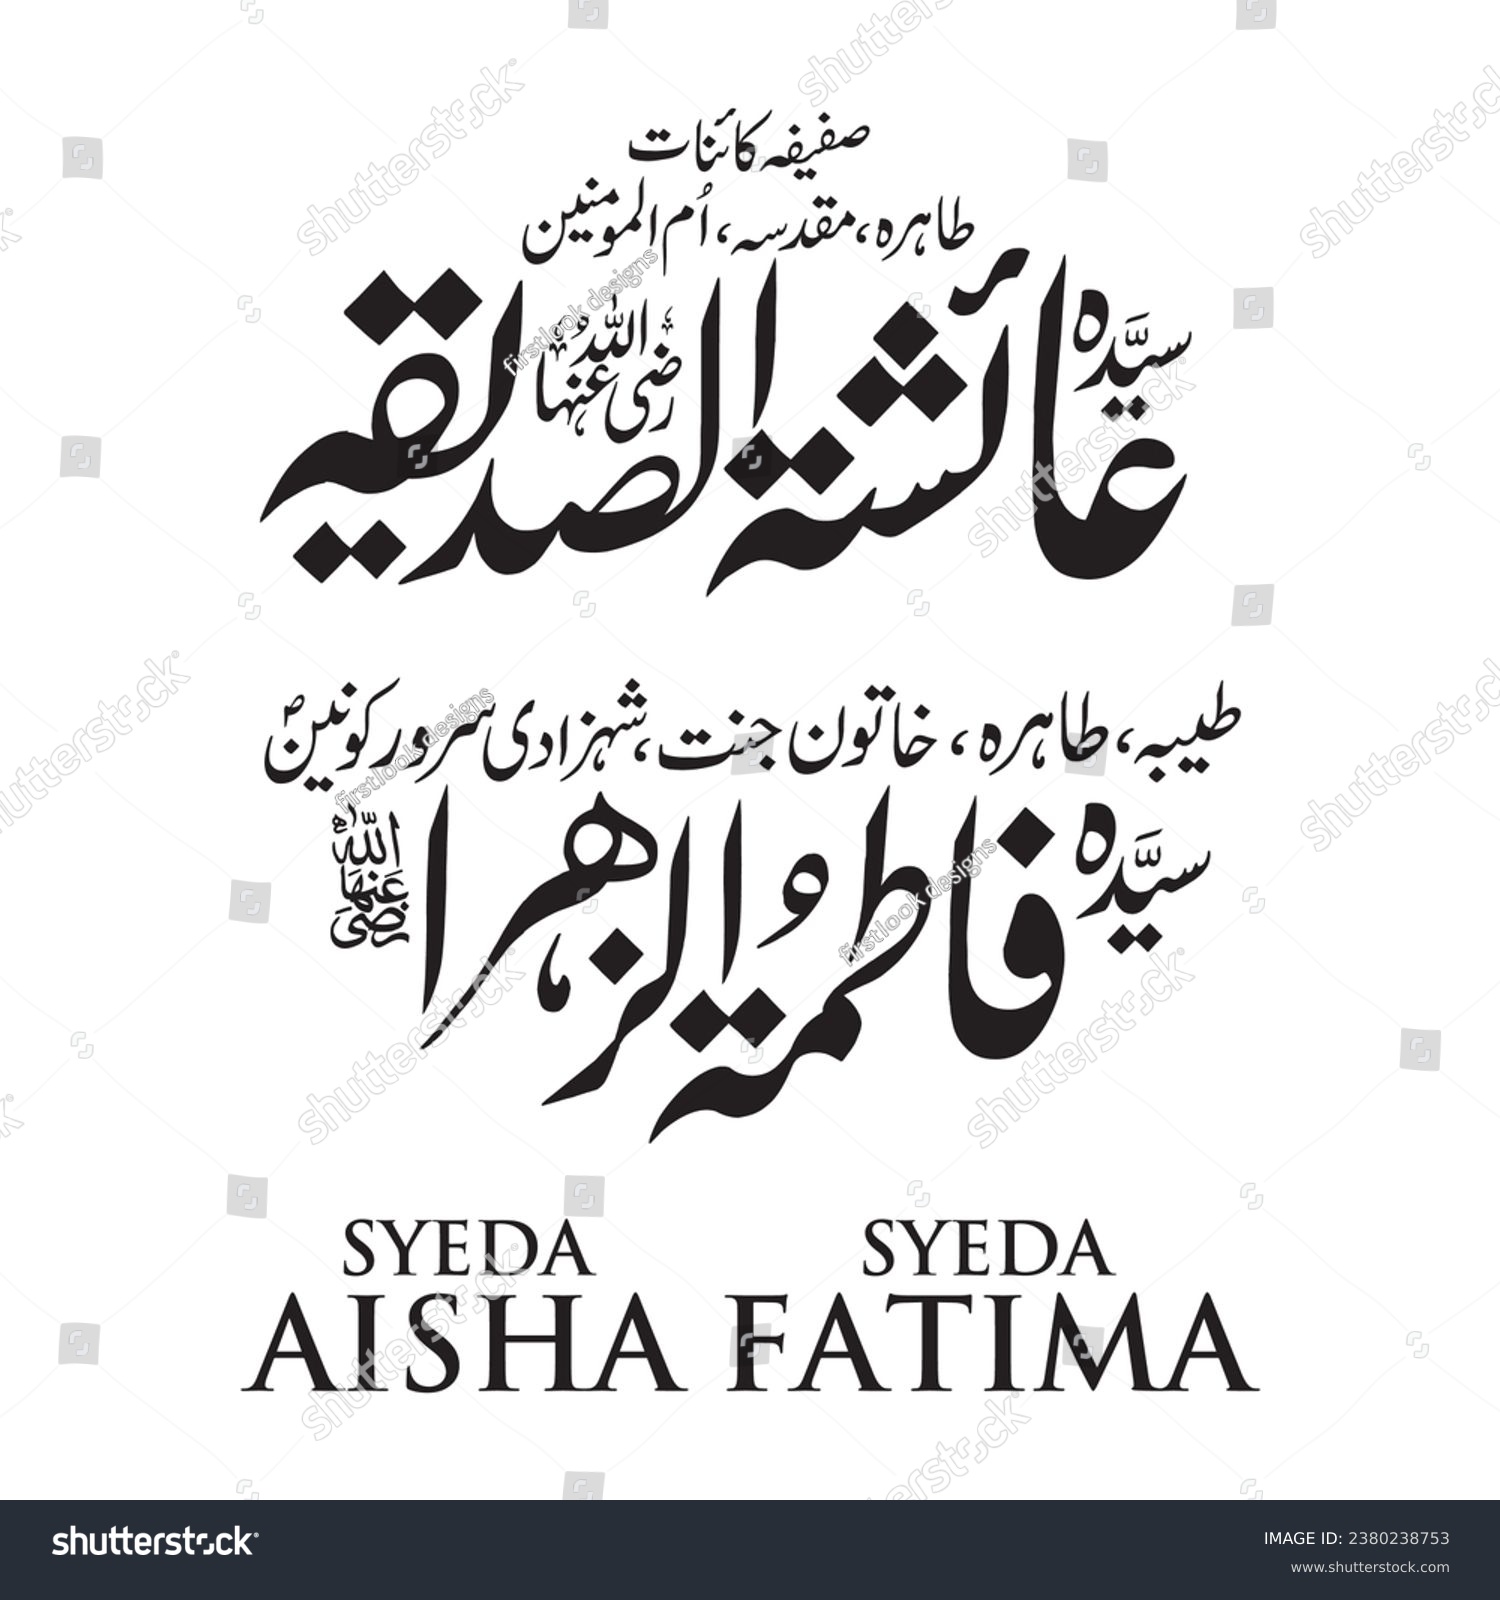 SVG of Creative Arabic Calligraphy. (Syeda Aisha and Syeda Fatima) In Arabic name means life. svg